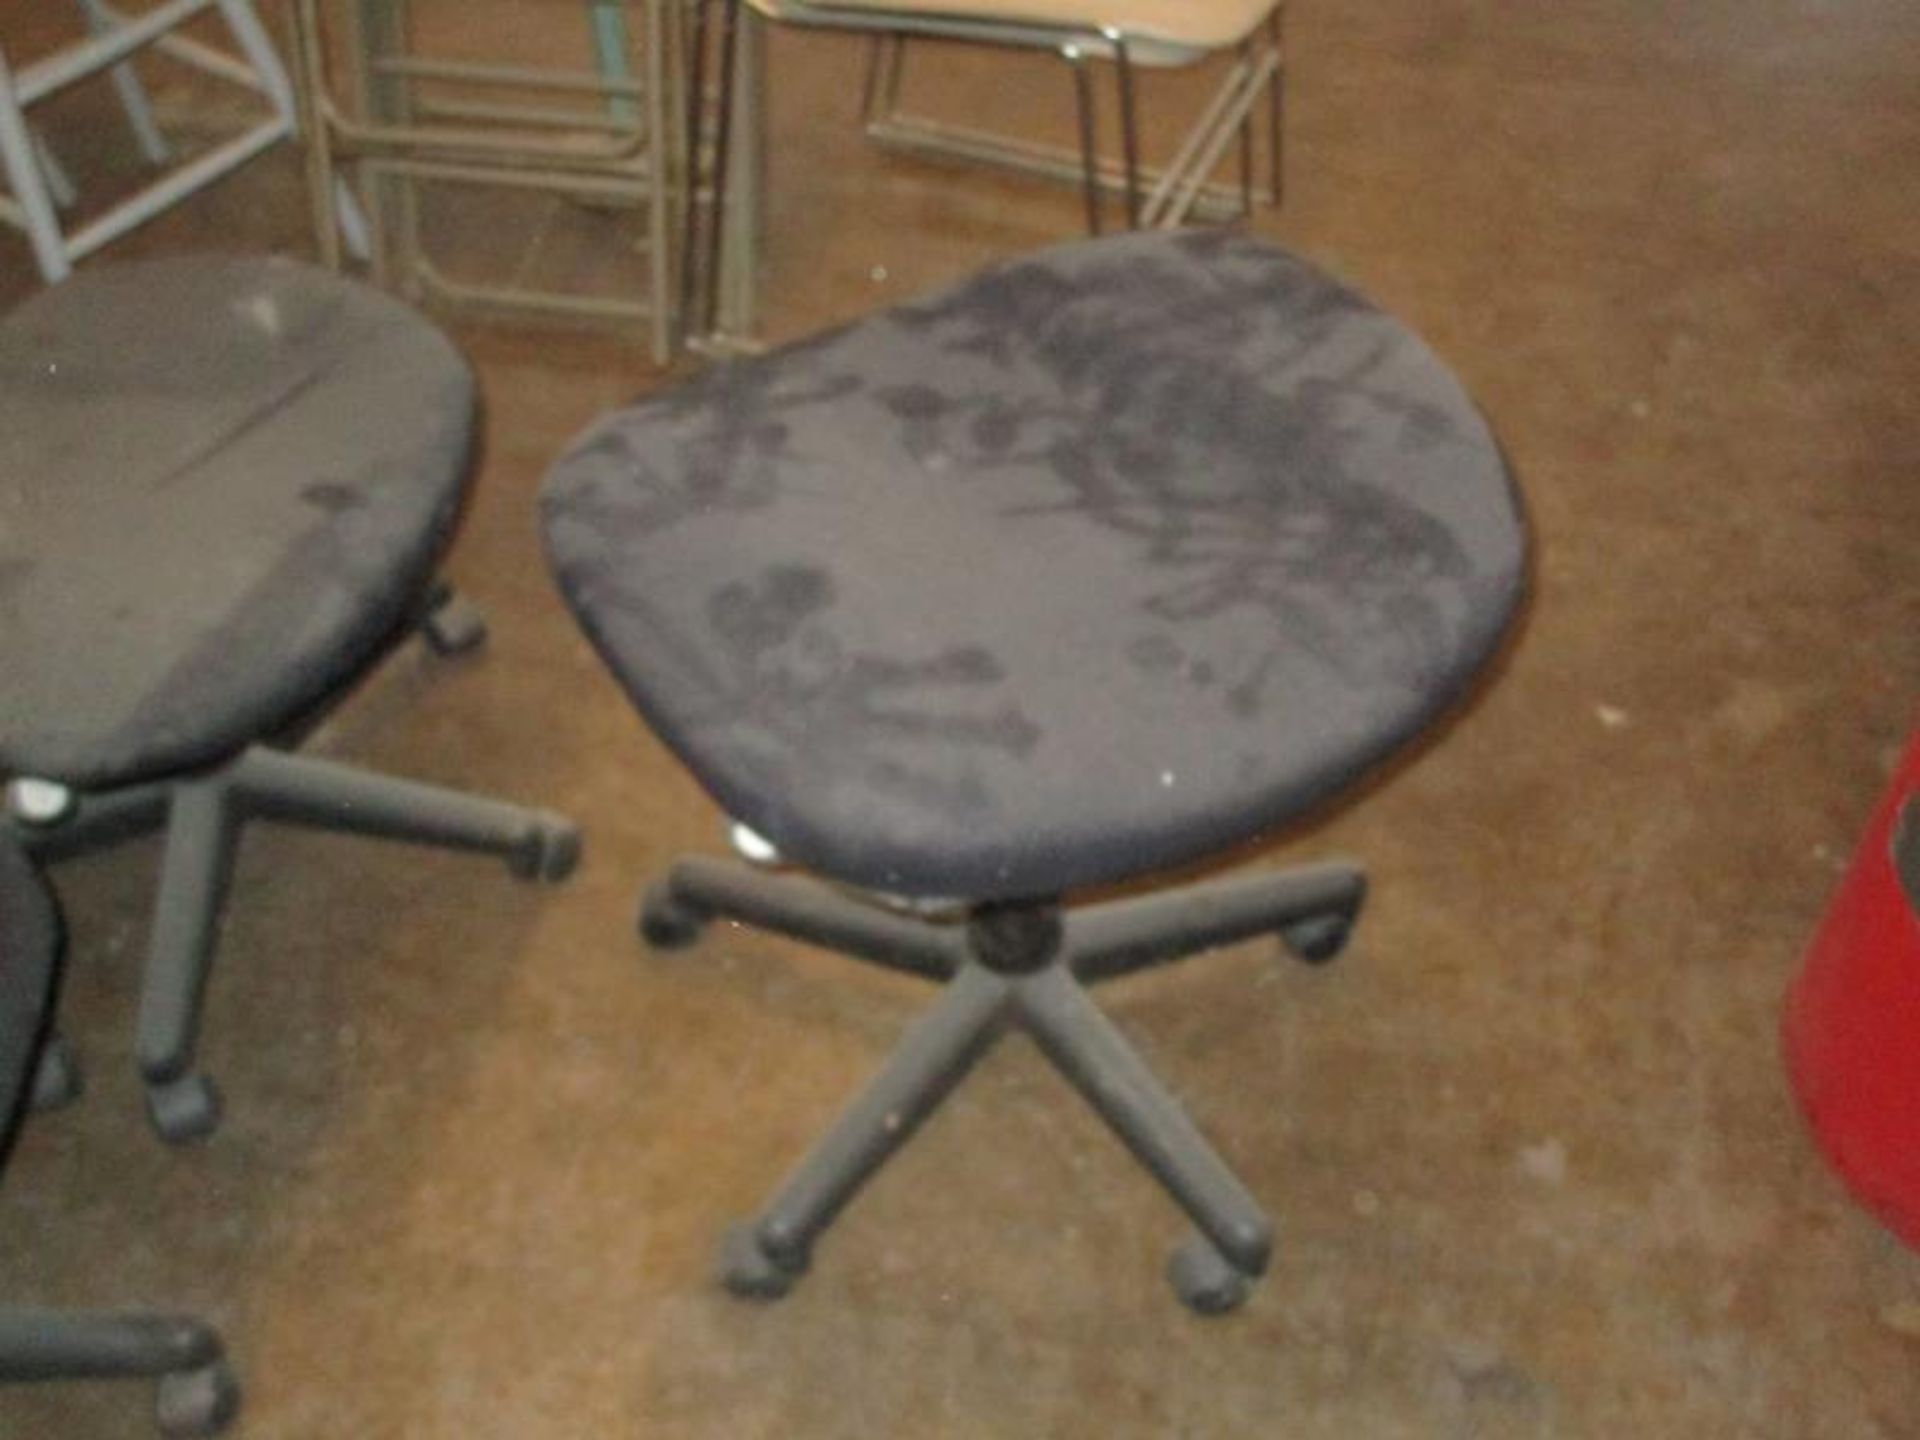 (10) Assorted Office Chairs on Casters, Fabric Seat / Back - 1 w/ Broken Back, (1) Rolling Stool - Image 9 of 14